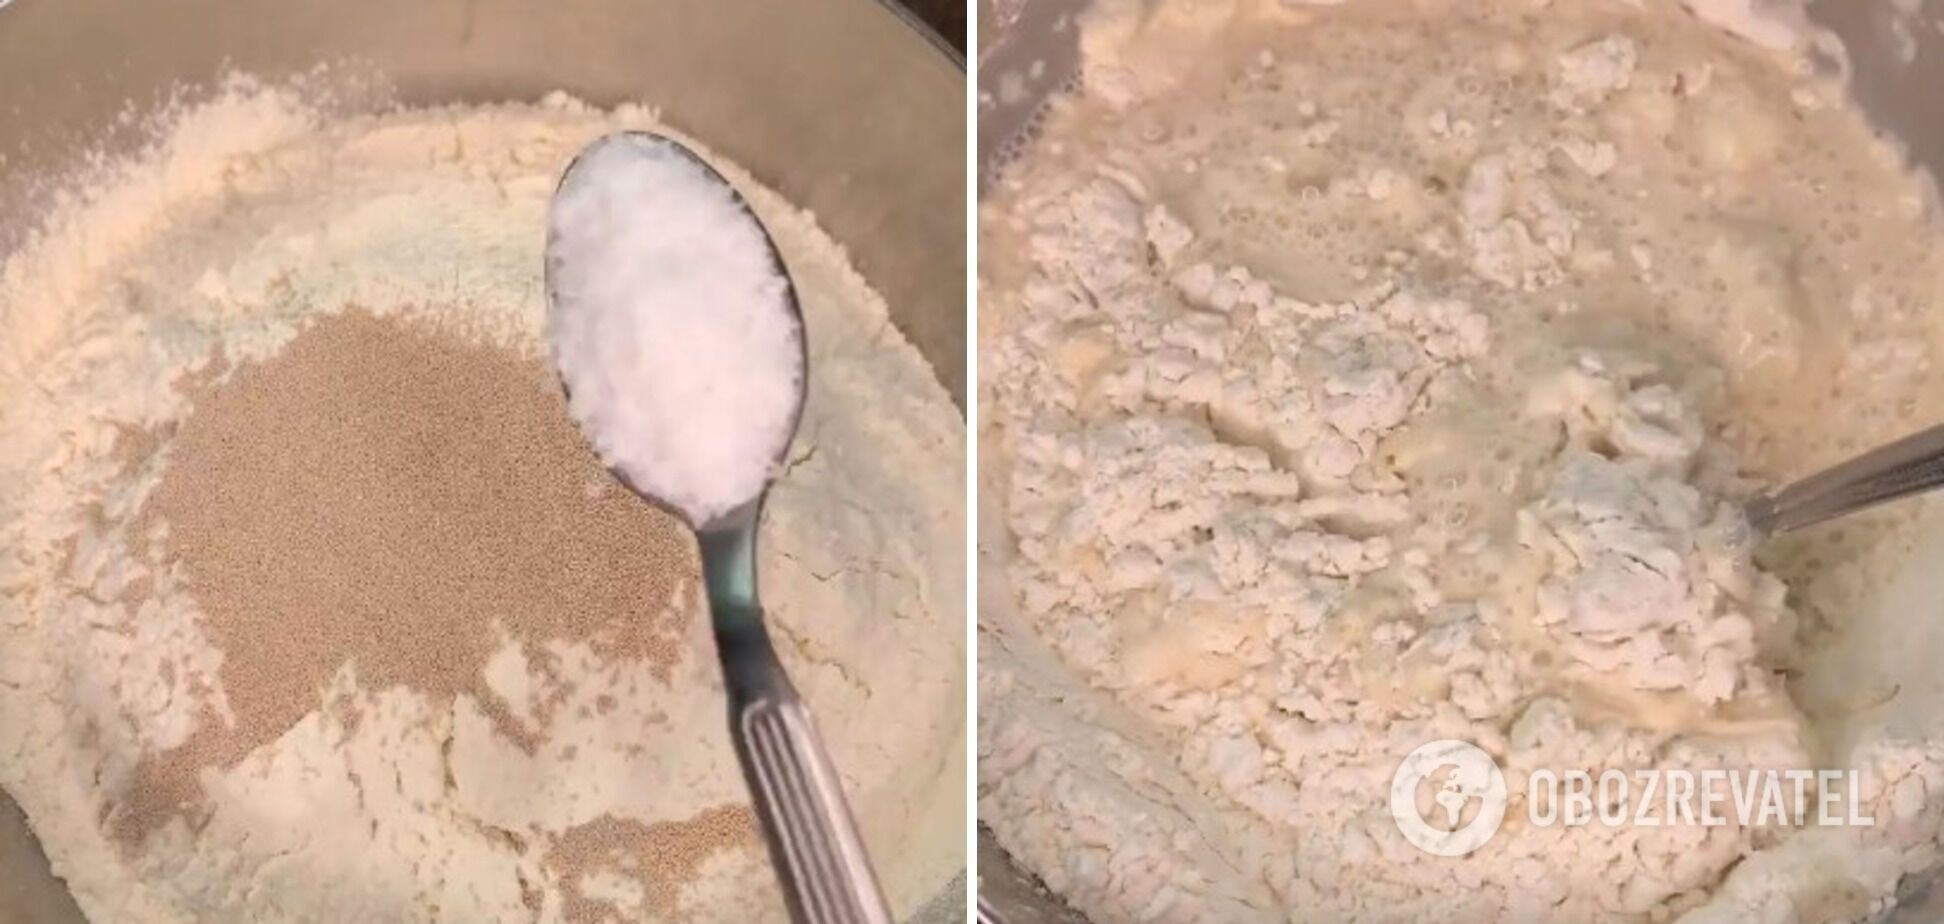 Flour and yeast